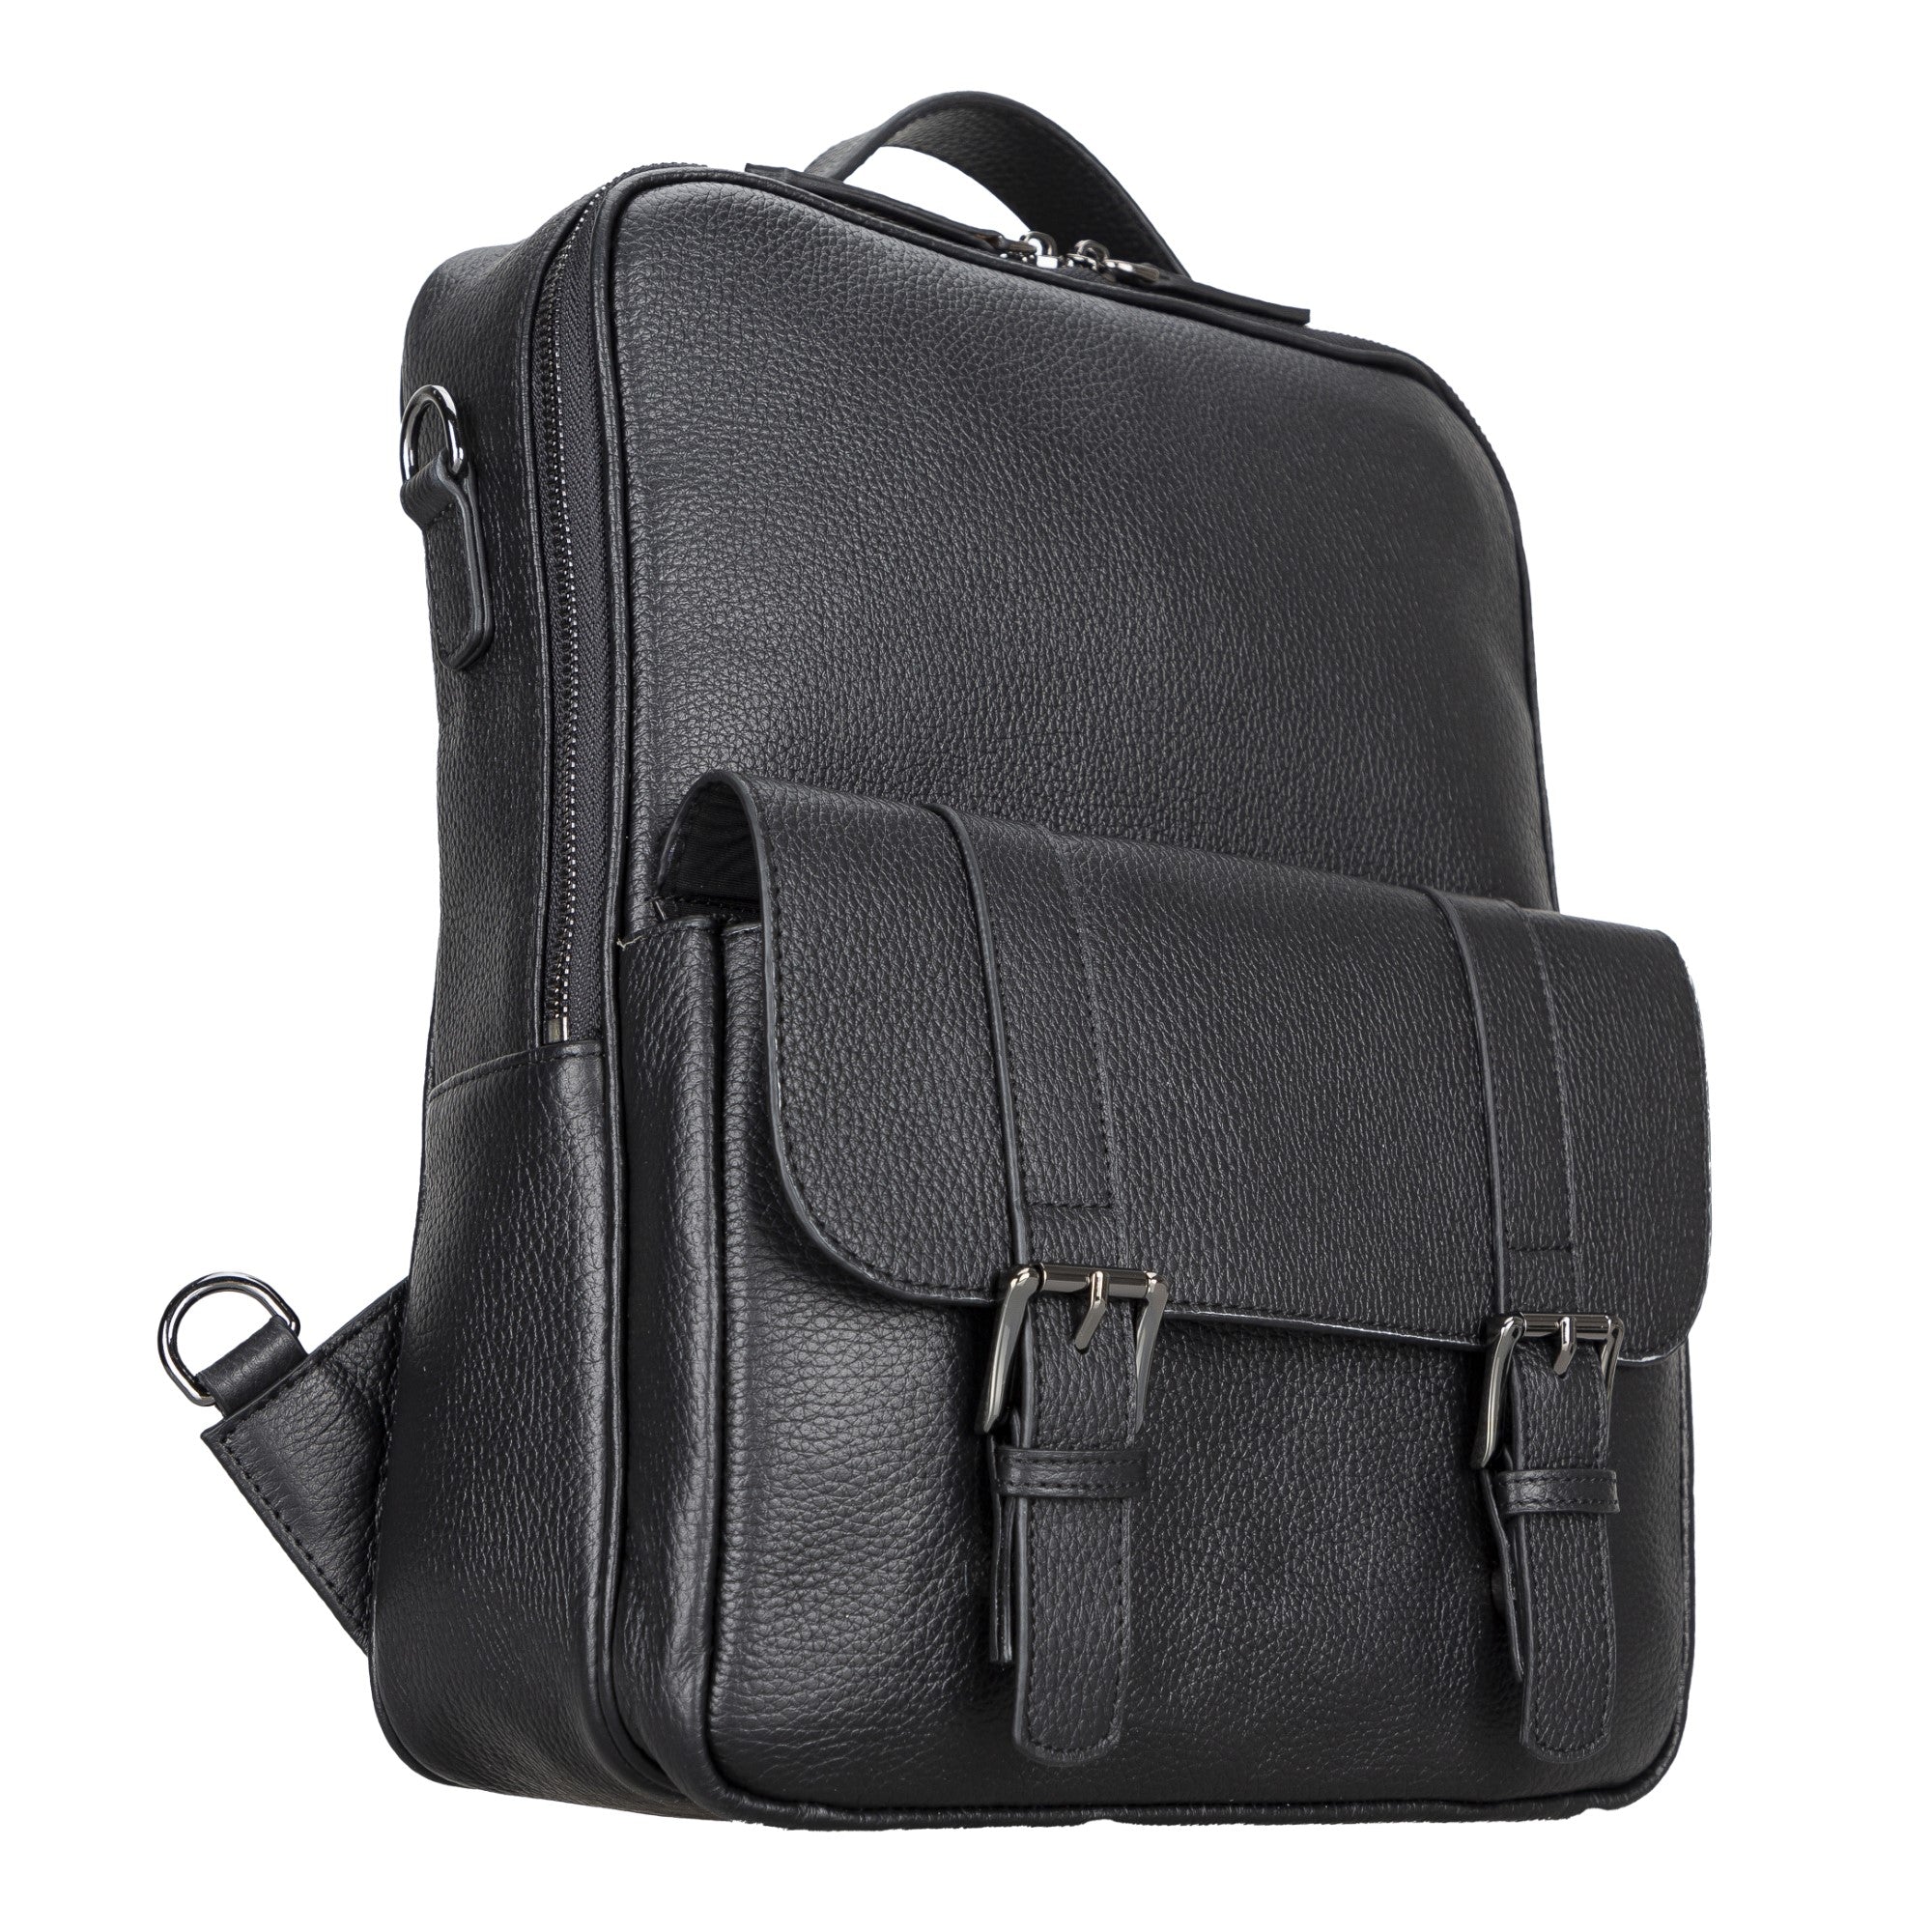 Molde Unisex Genuine Leather Backpack for Daily Life or Laptop / MacBook